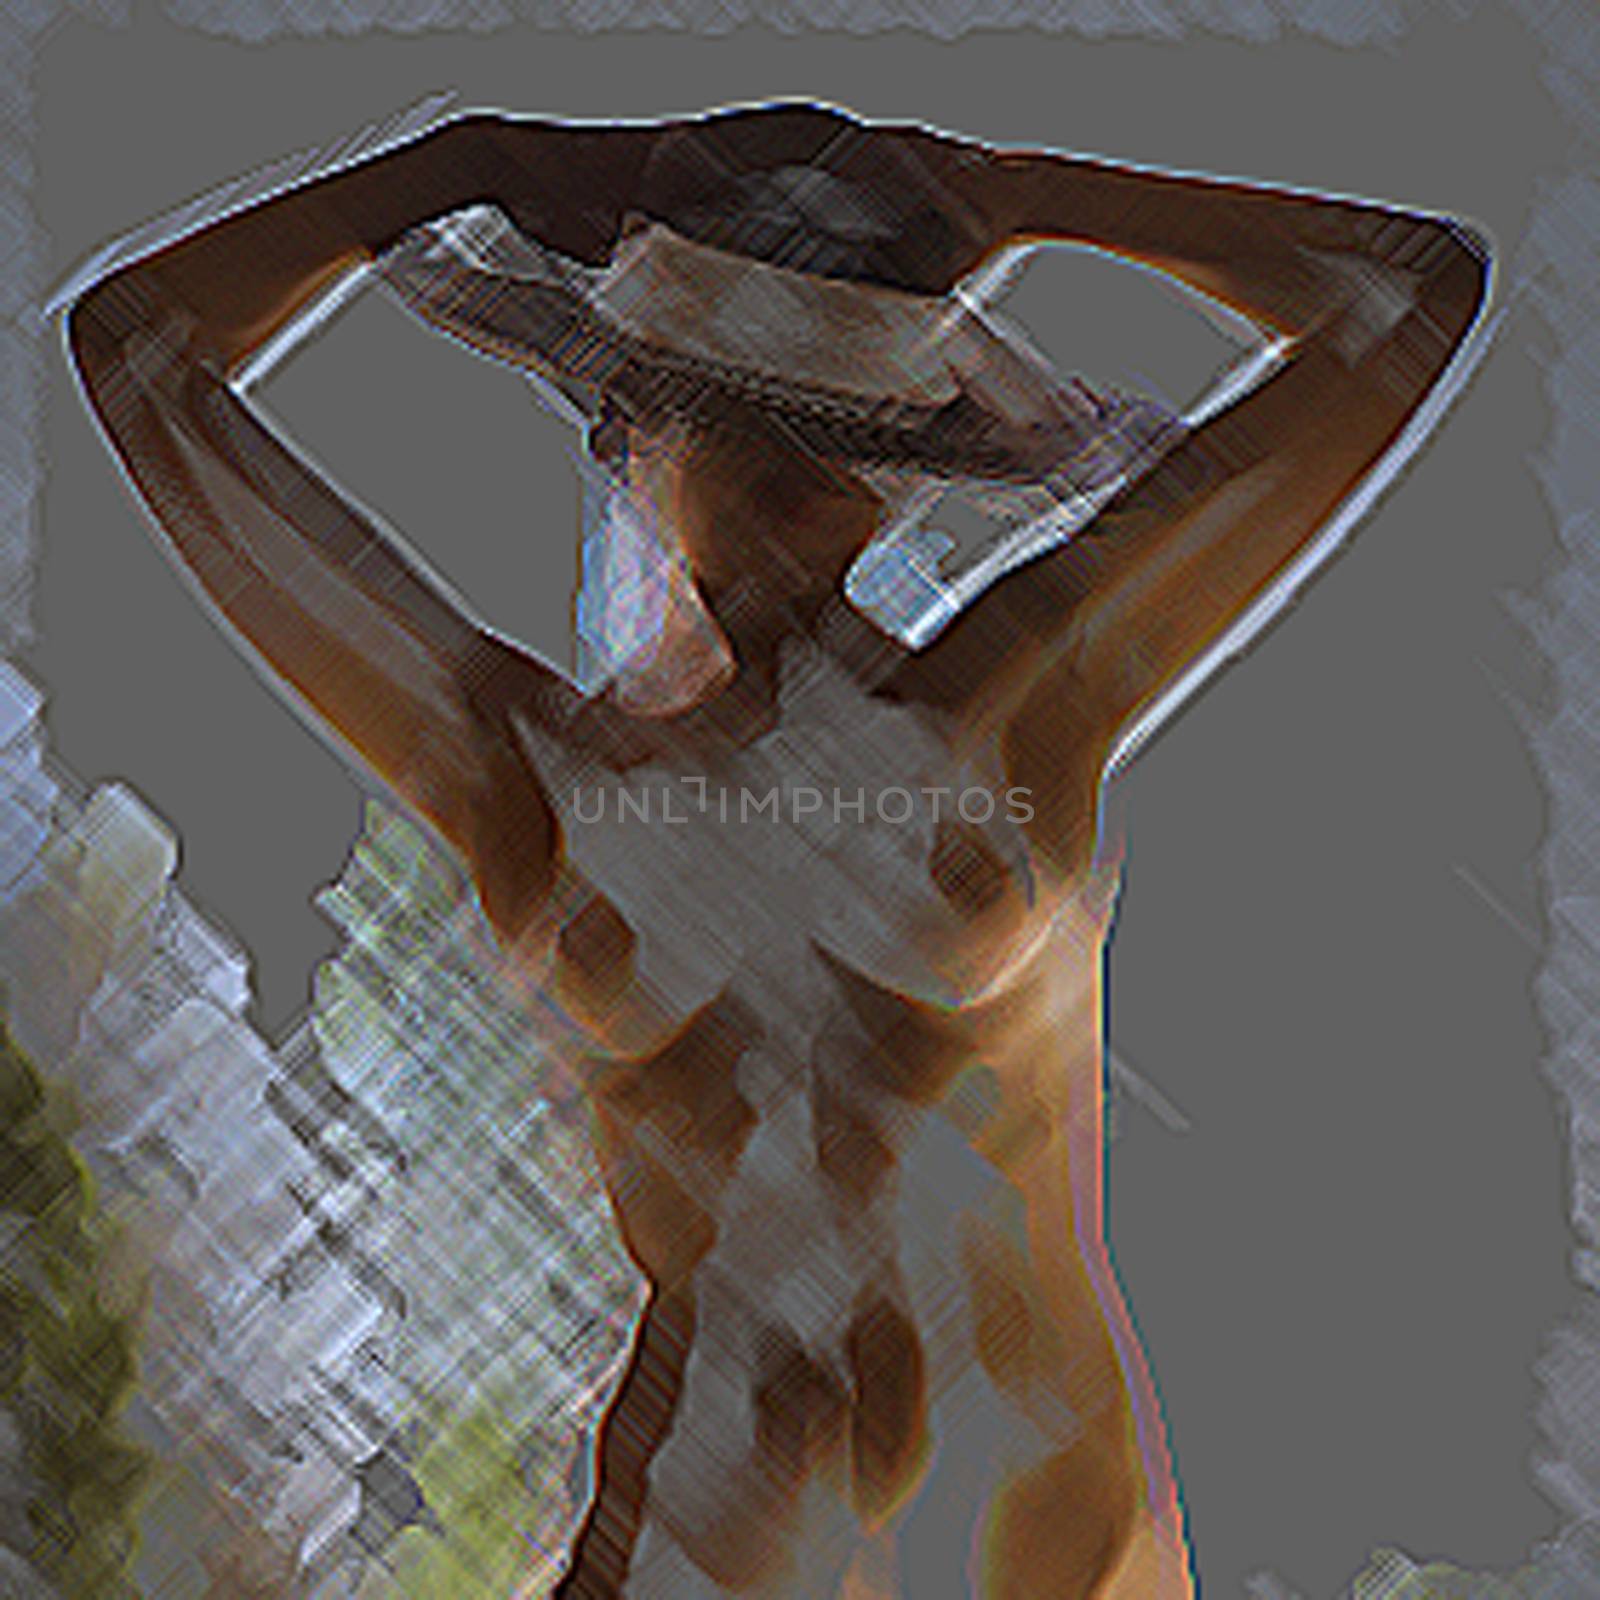 Impression of a Nude Woman by photocdn39